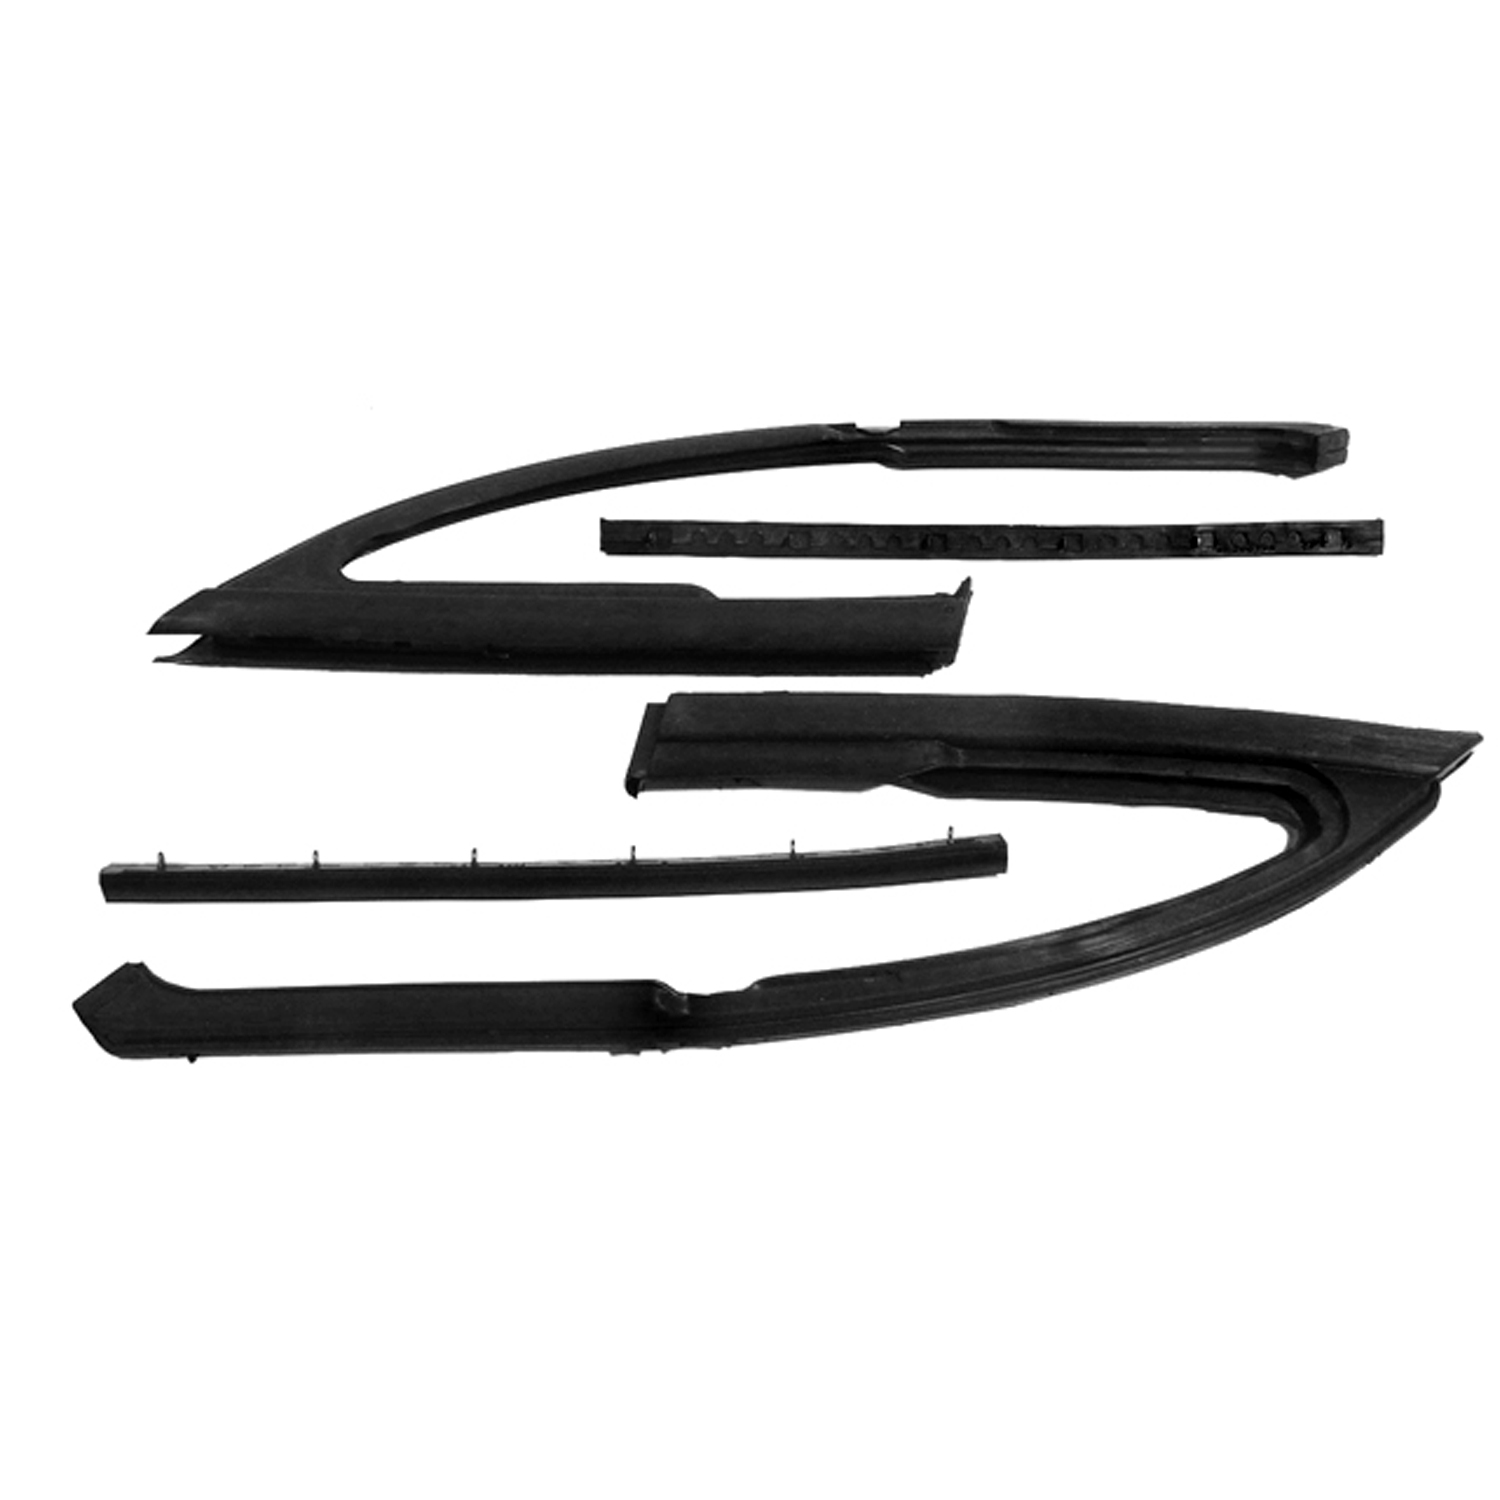 1967 Oldsmobile Cutlass Vent Window Seals.  Fits 2-door sedan (coupe  sports coupe)-WR 2009-A